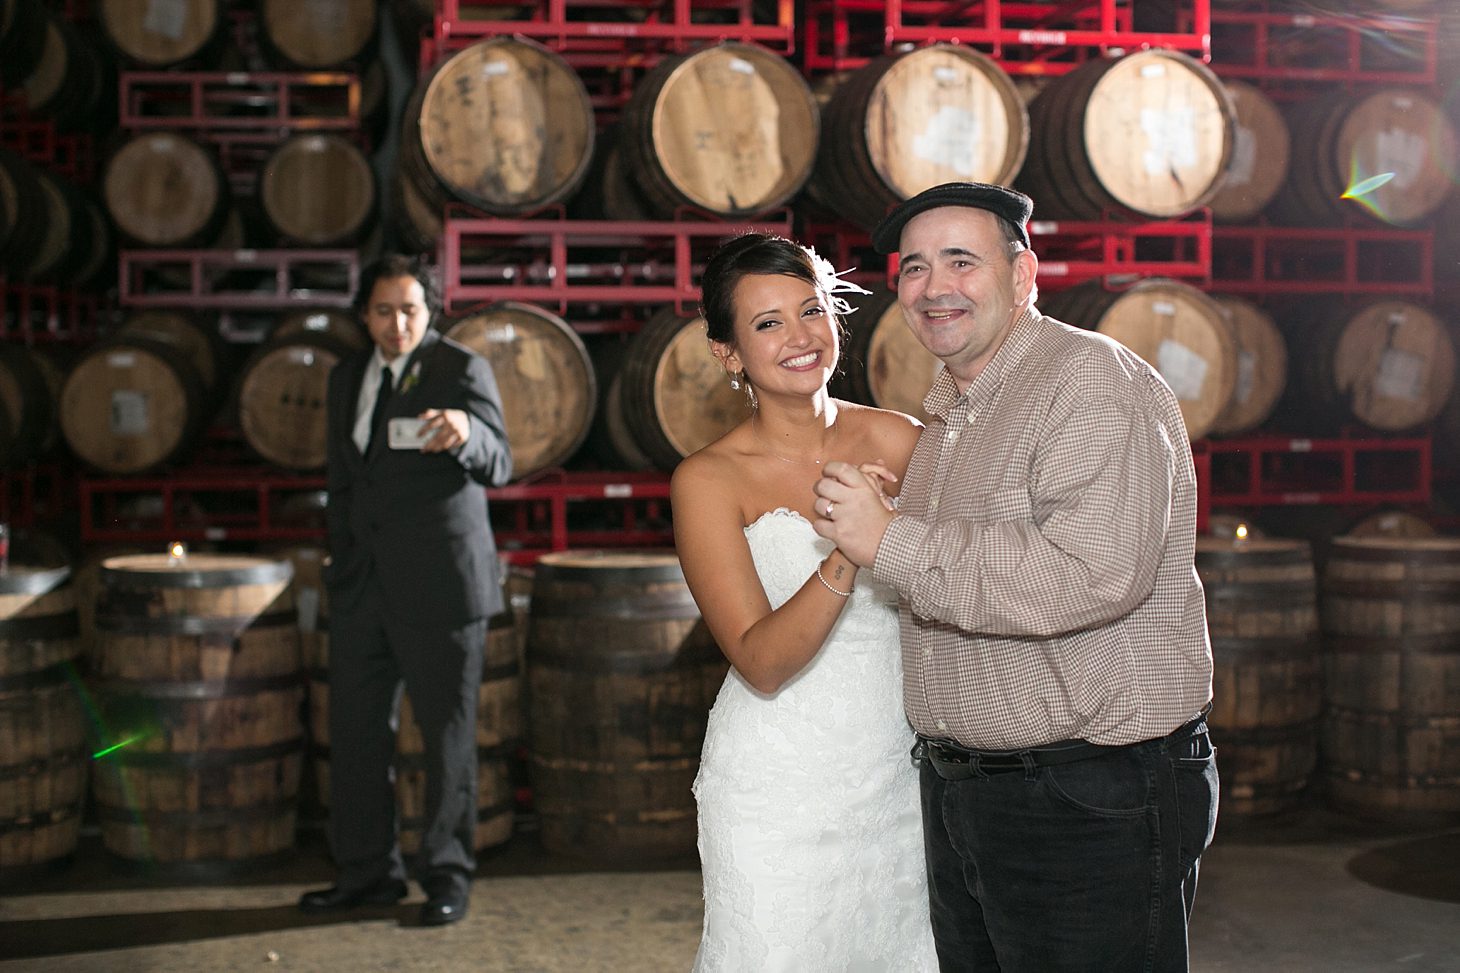 Revolution Tap Room Chicago Wedding by Christy Tyler Photography_0072